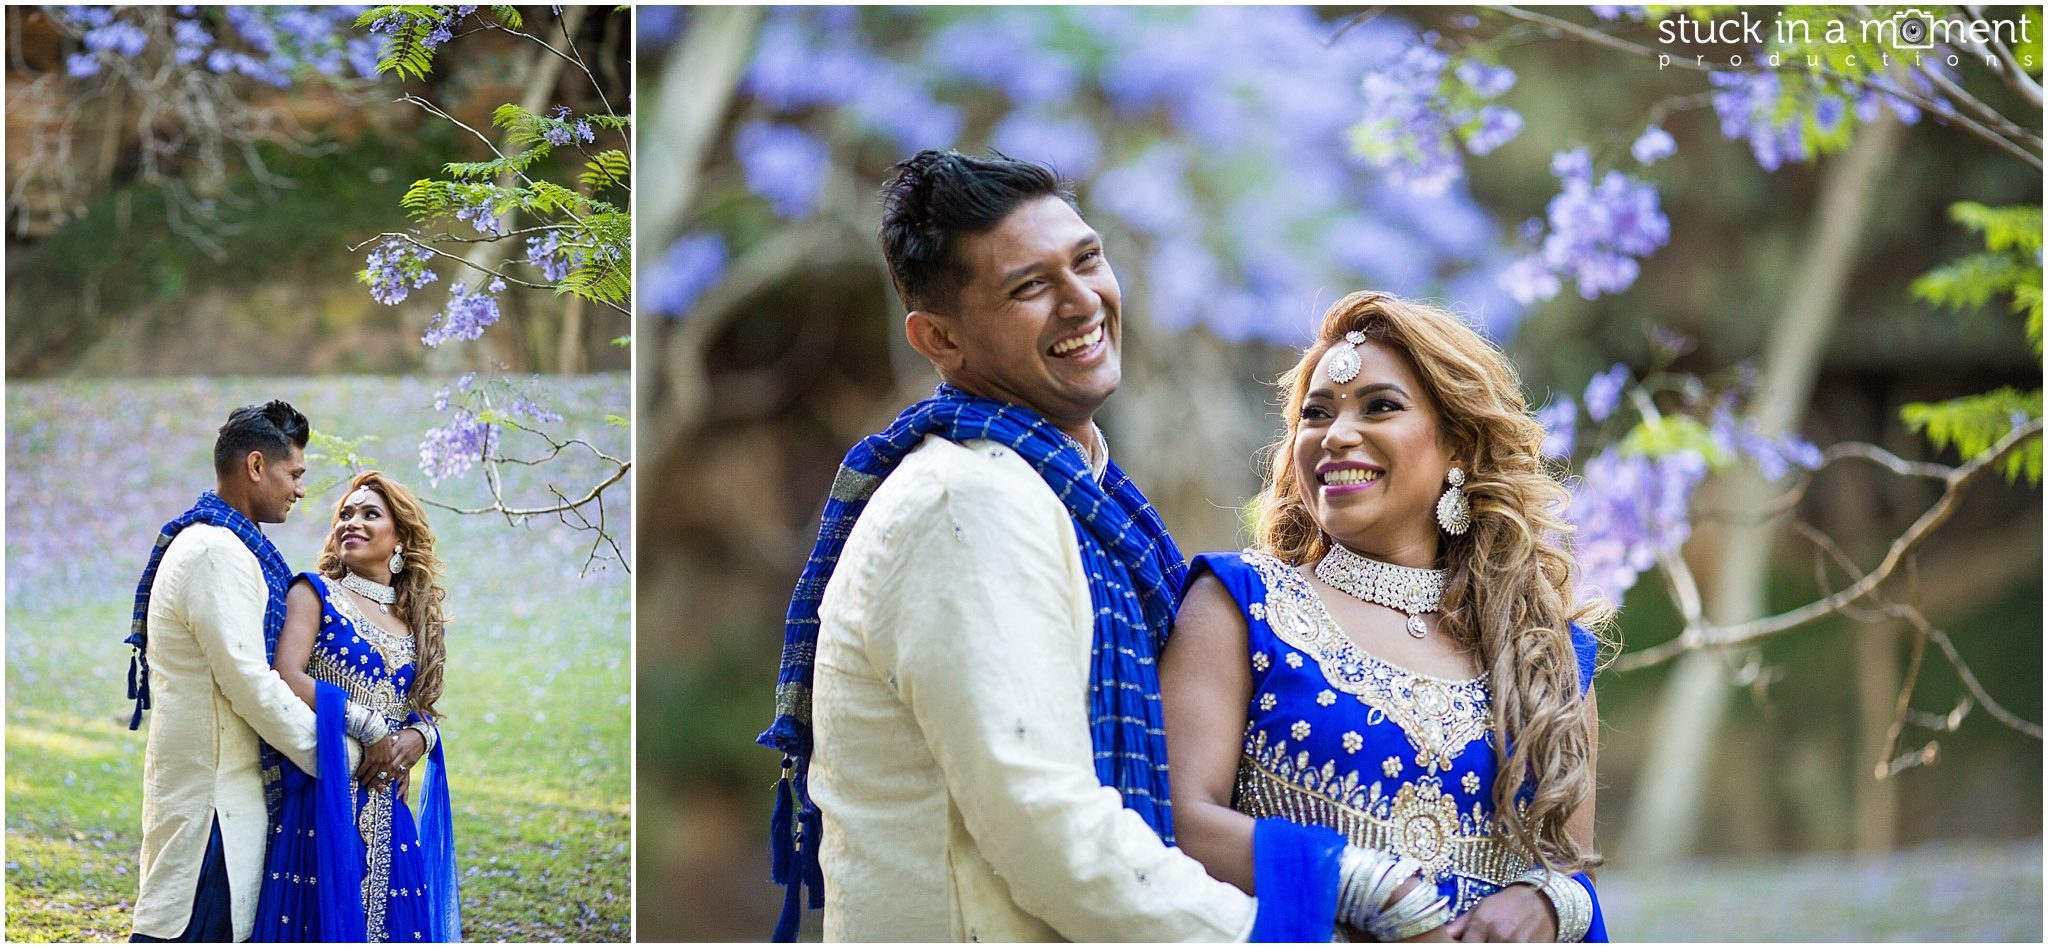 south indian wedding photographer sydney concord function centre